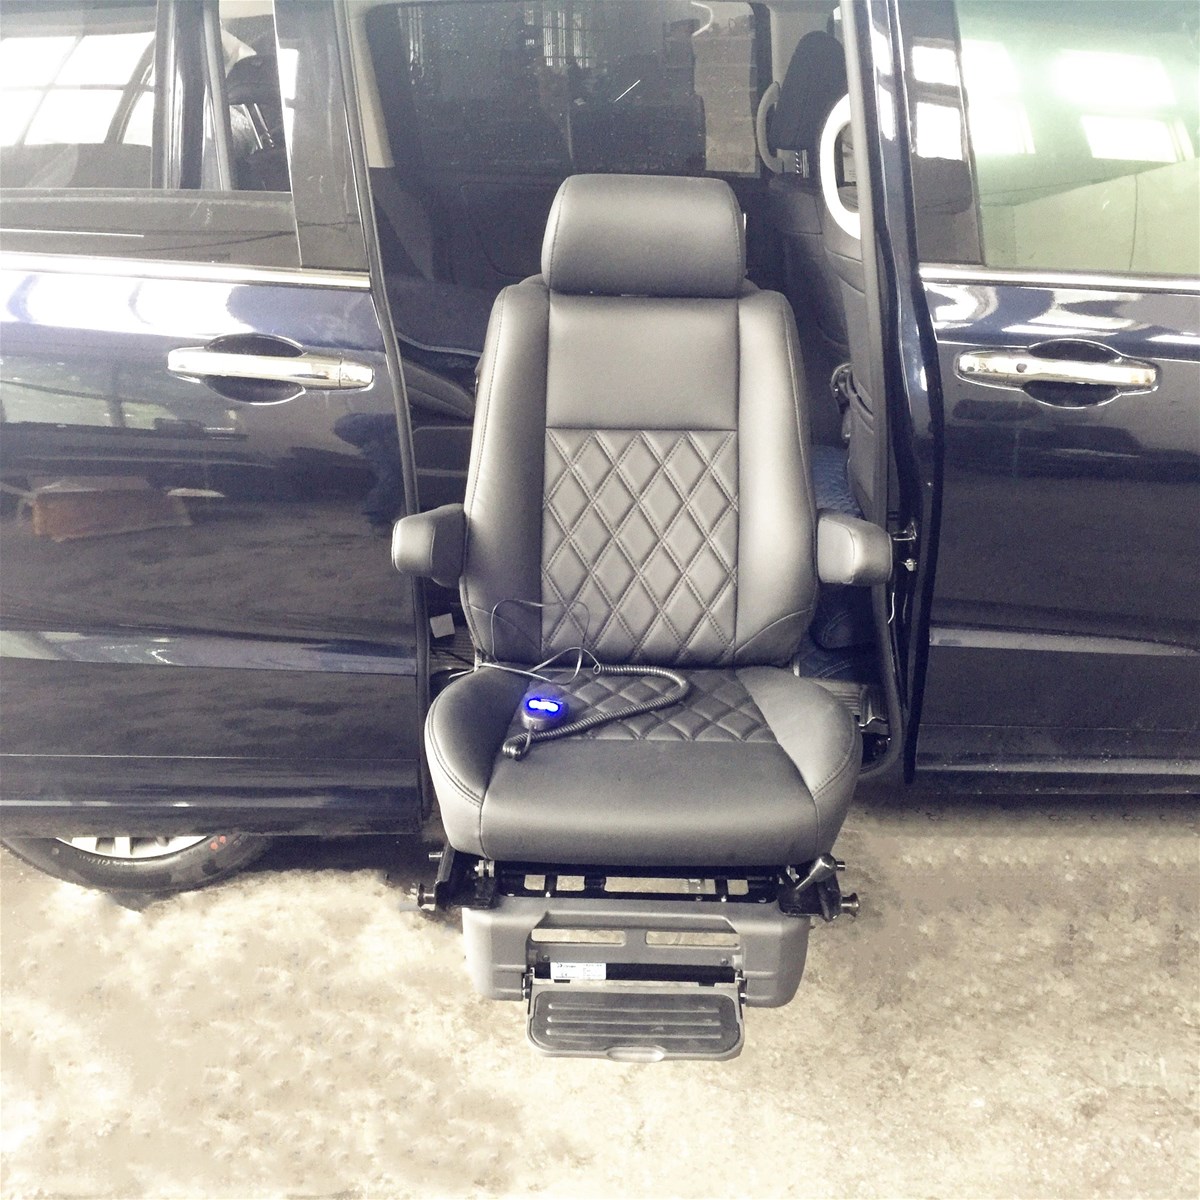 SLIFT Lifting Swivel Seat for the Disabled